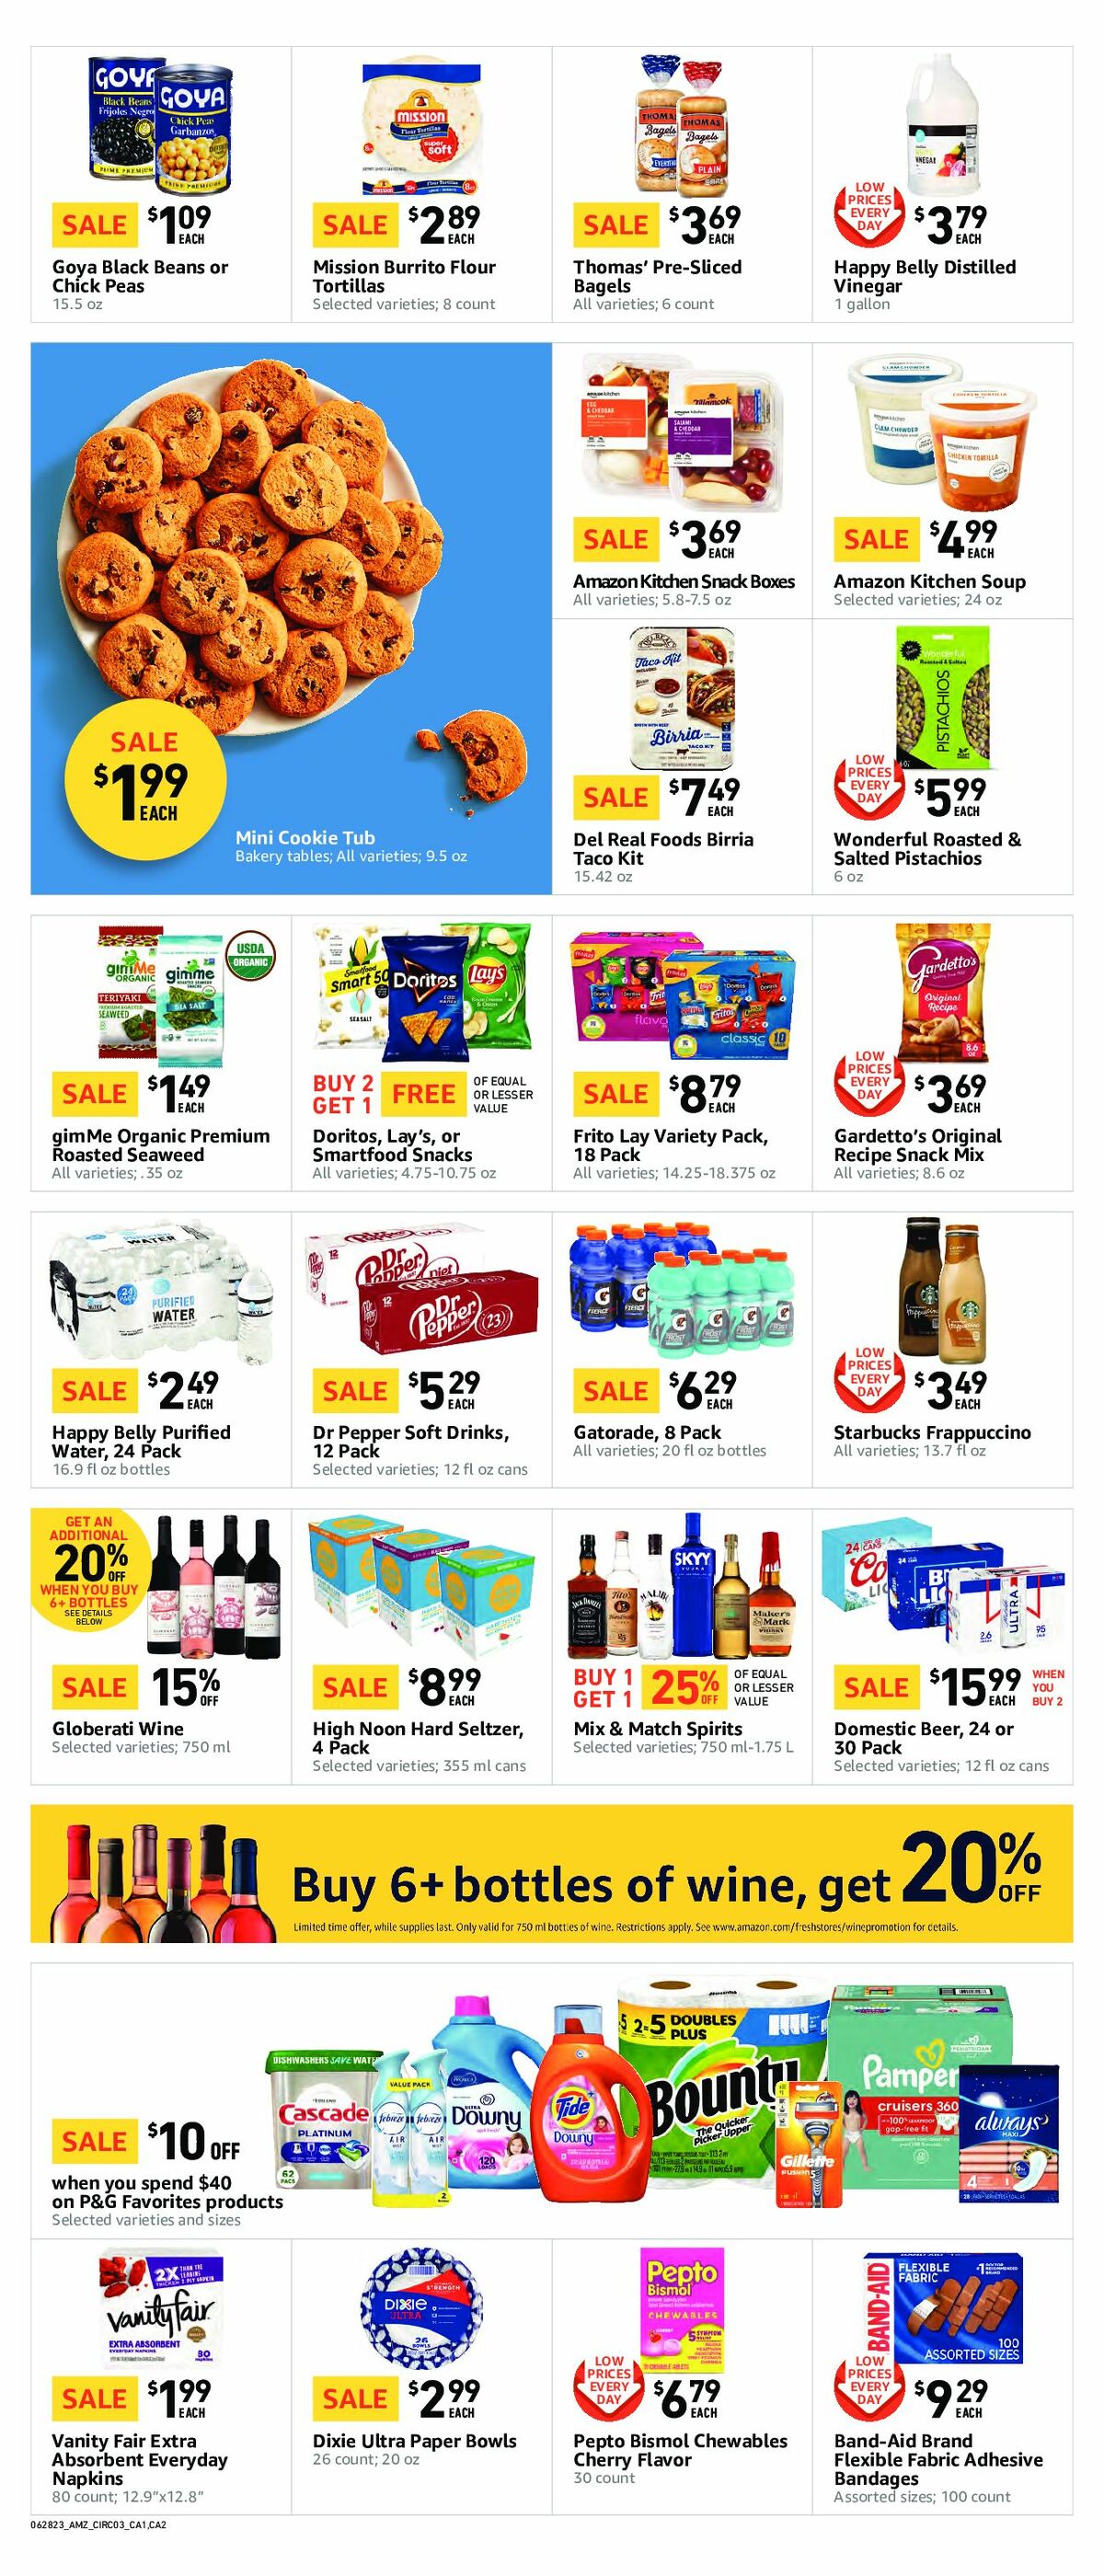 Amazon Fresh Weekly Ad from June 28